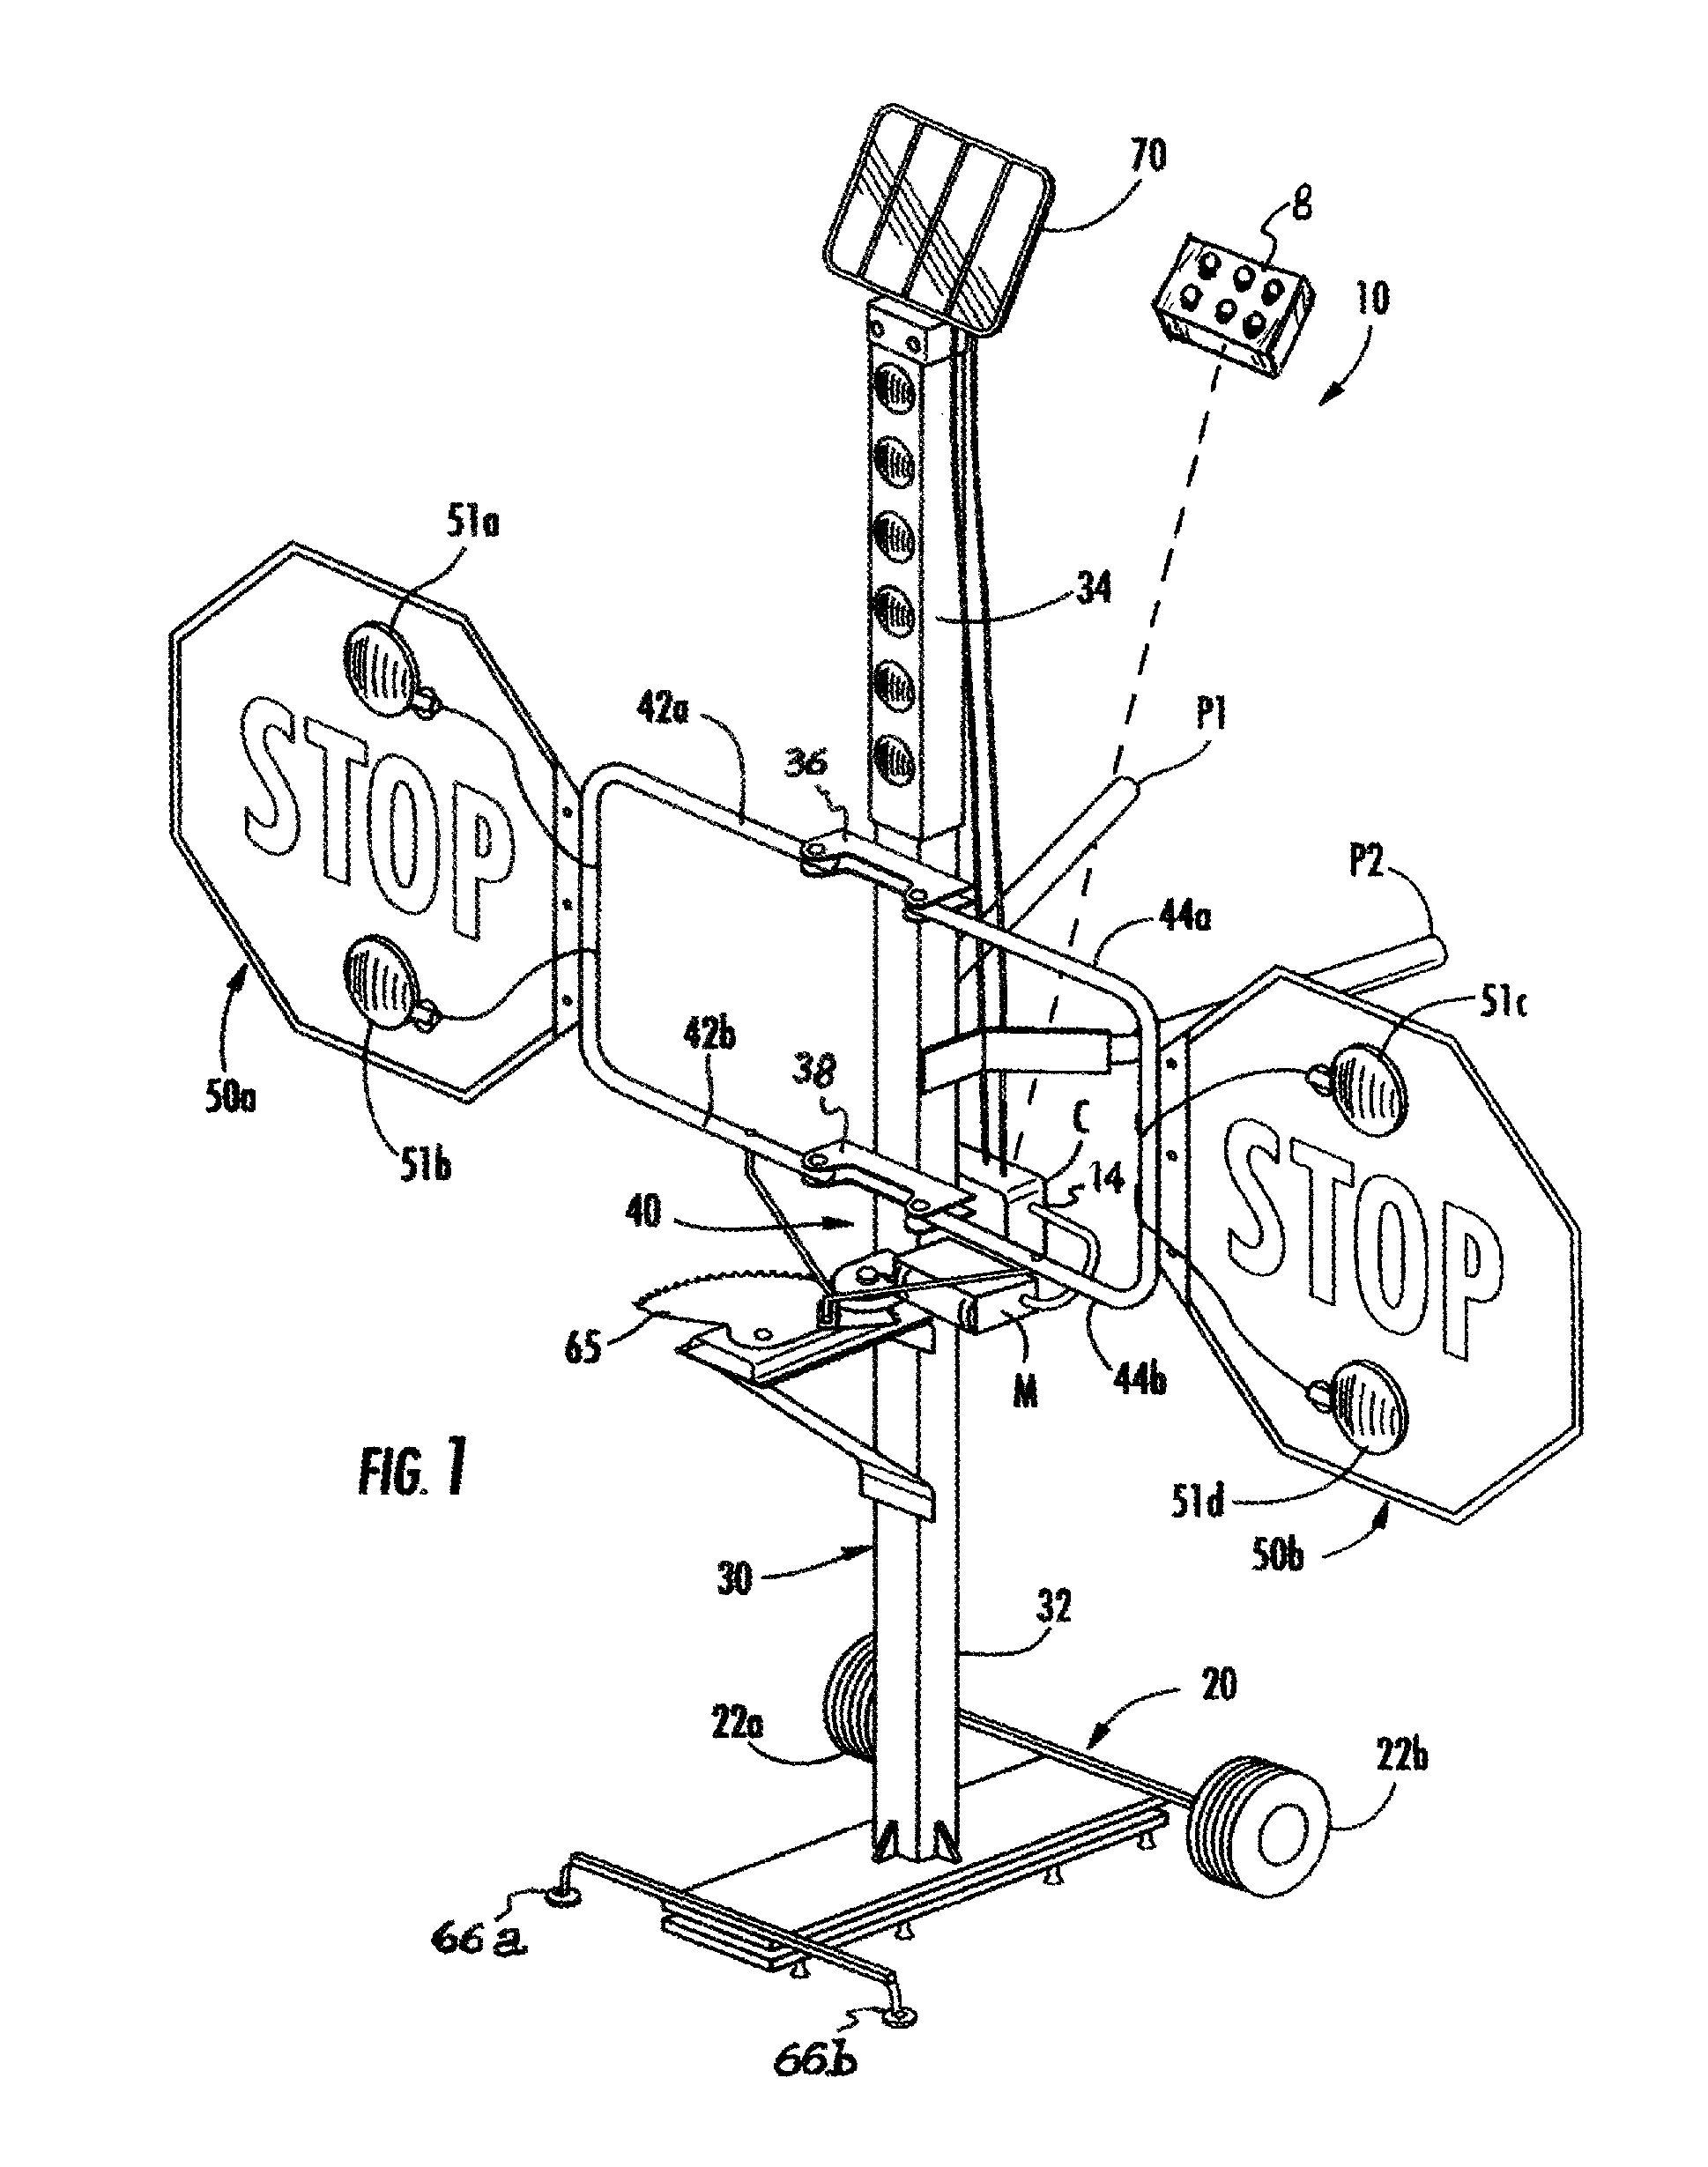 Portable electro-mechanical signal system